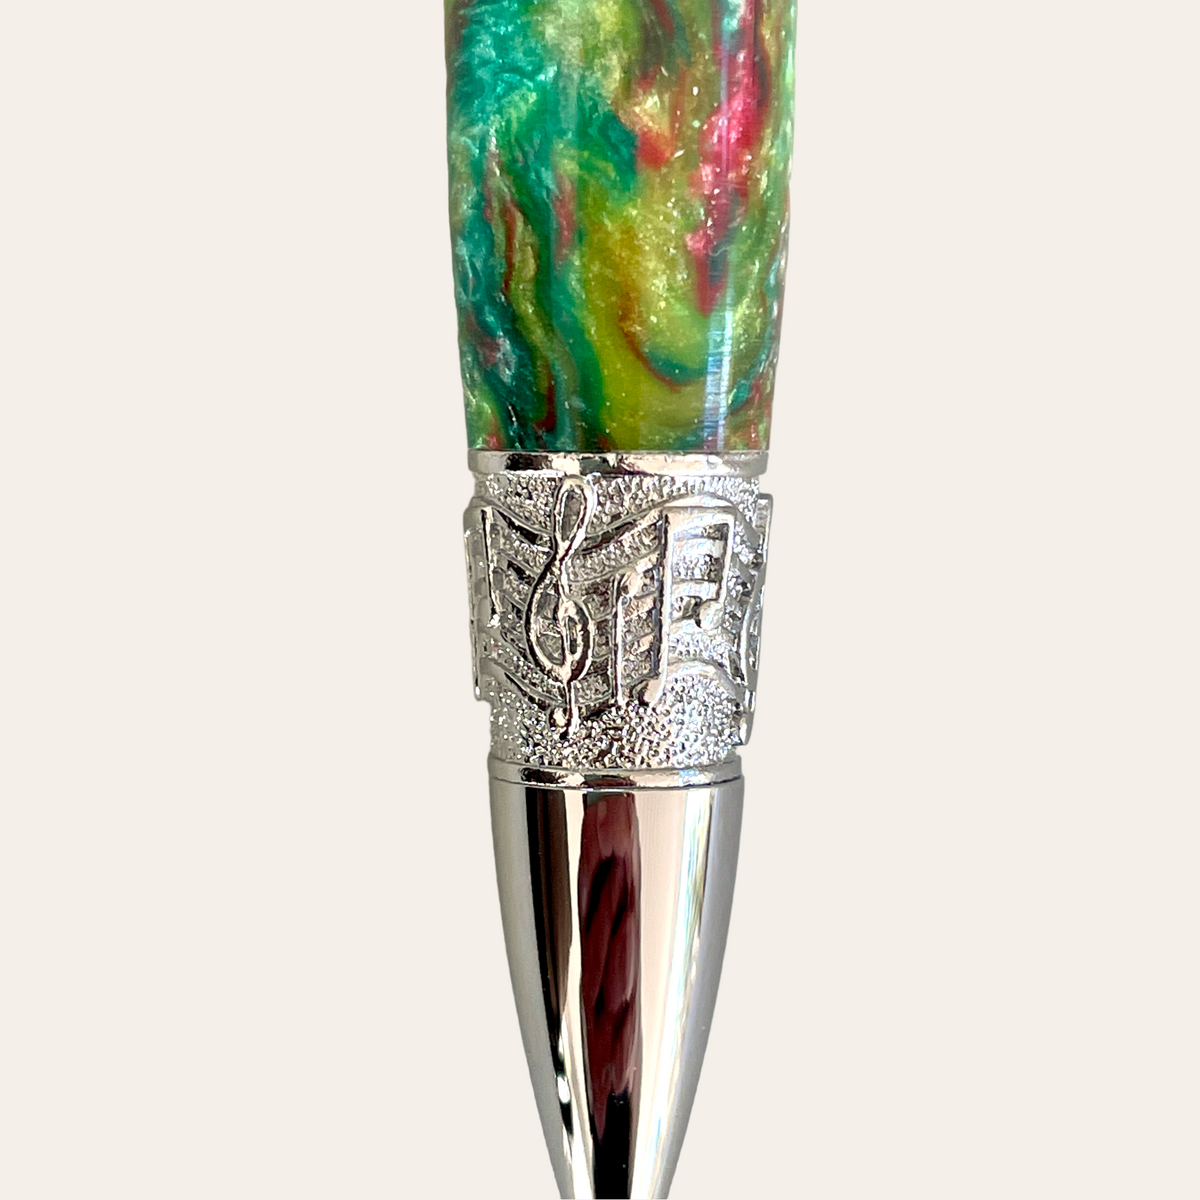 Hand Turned Resin Music Pen With Chrome Trim- Jazz Pens Paul's Hand Turned Creations   